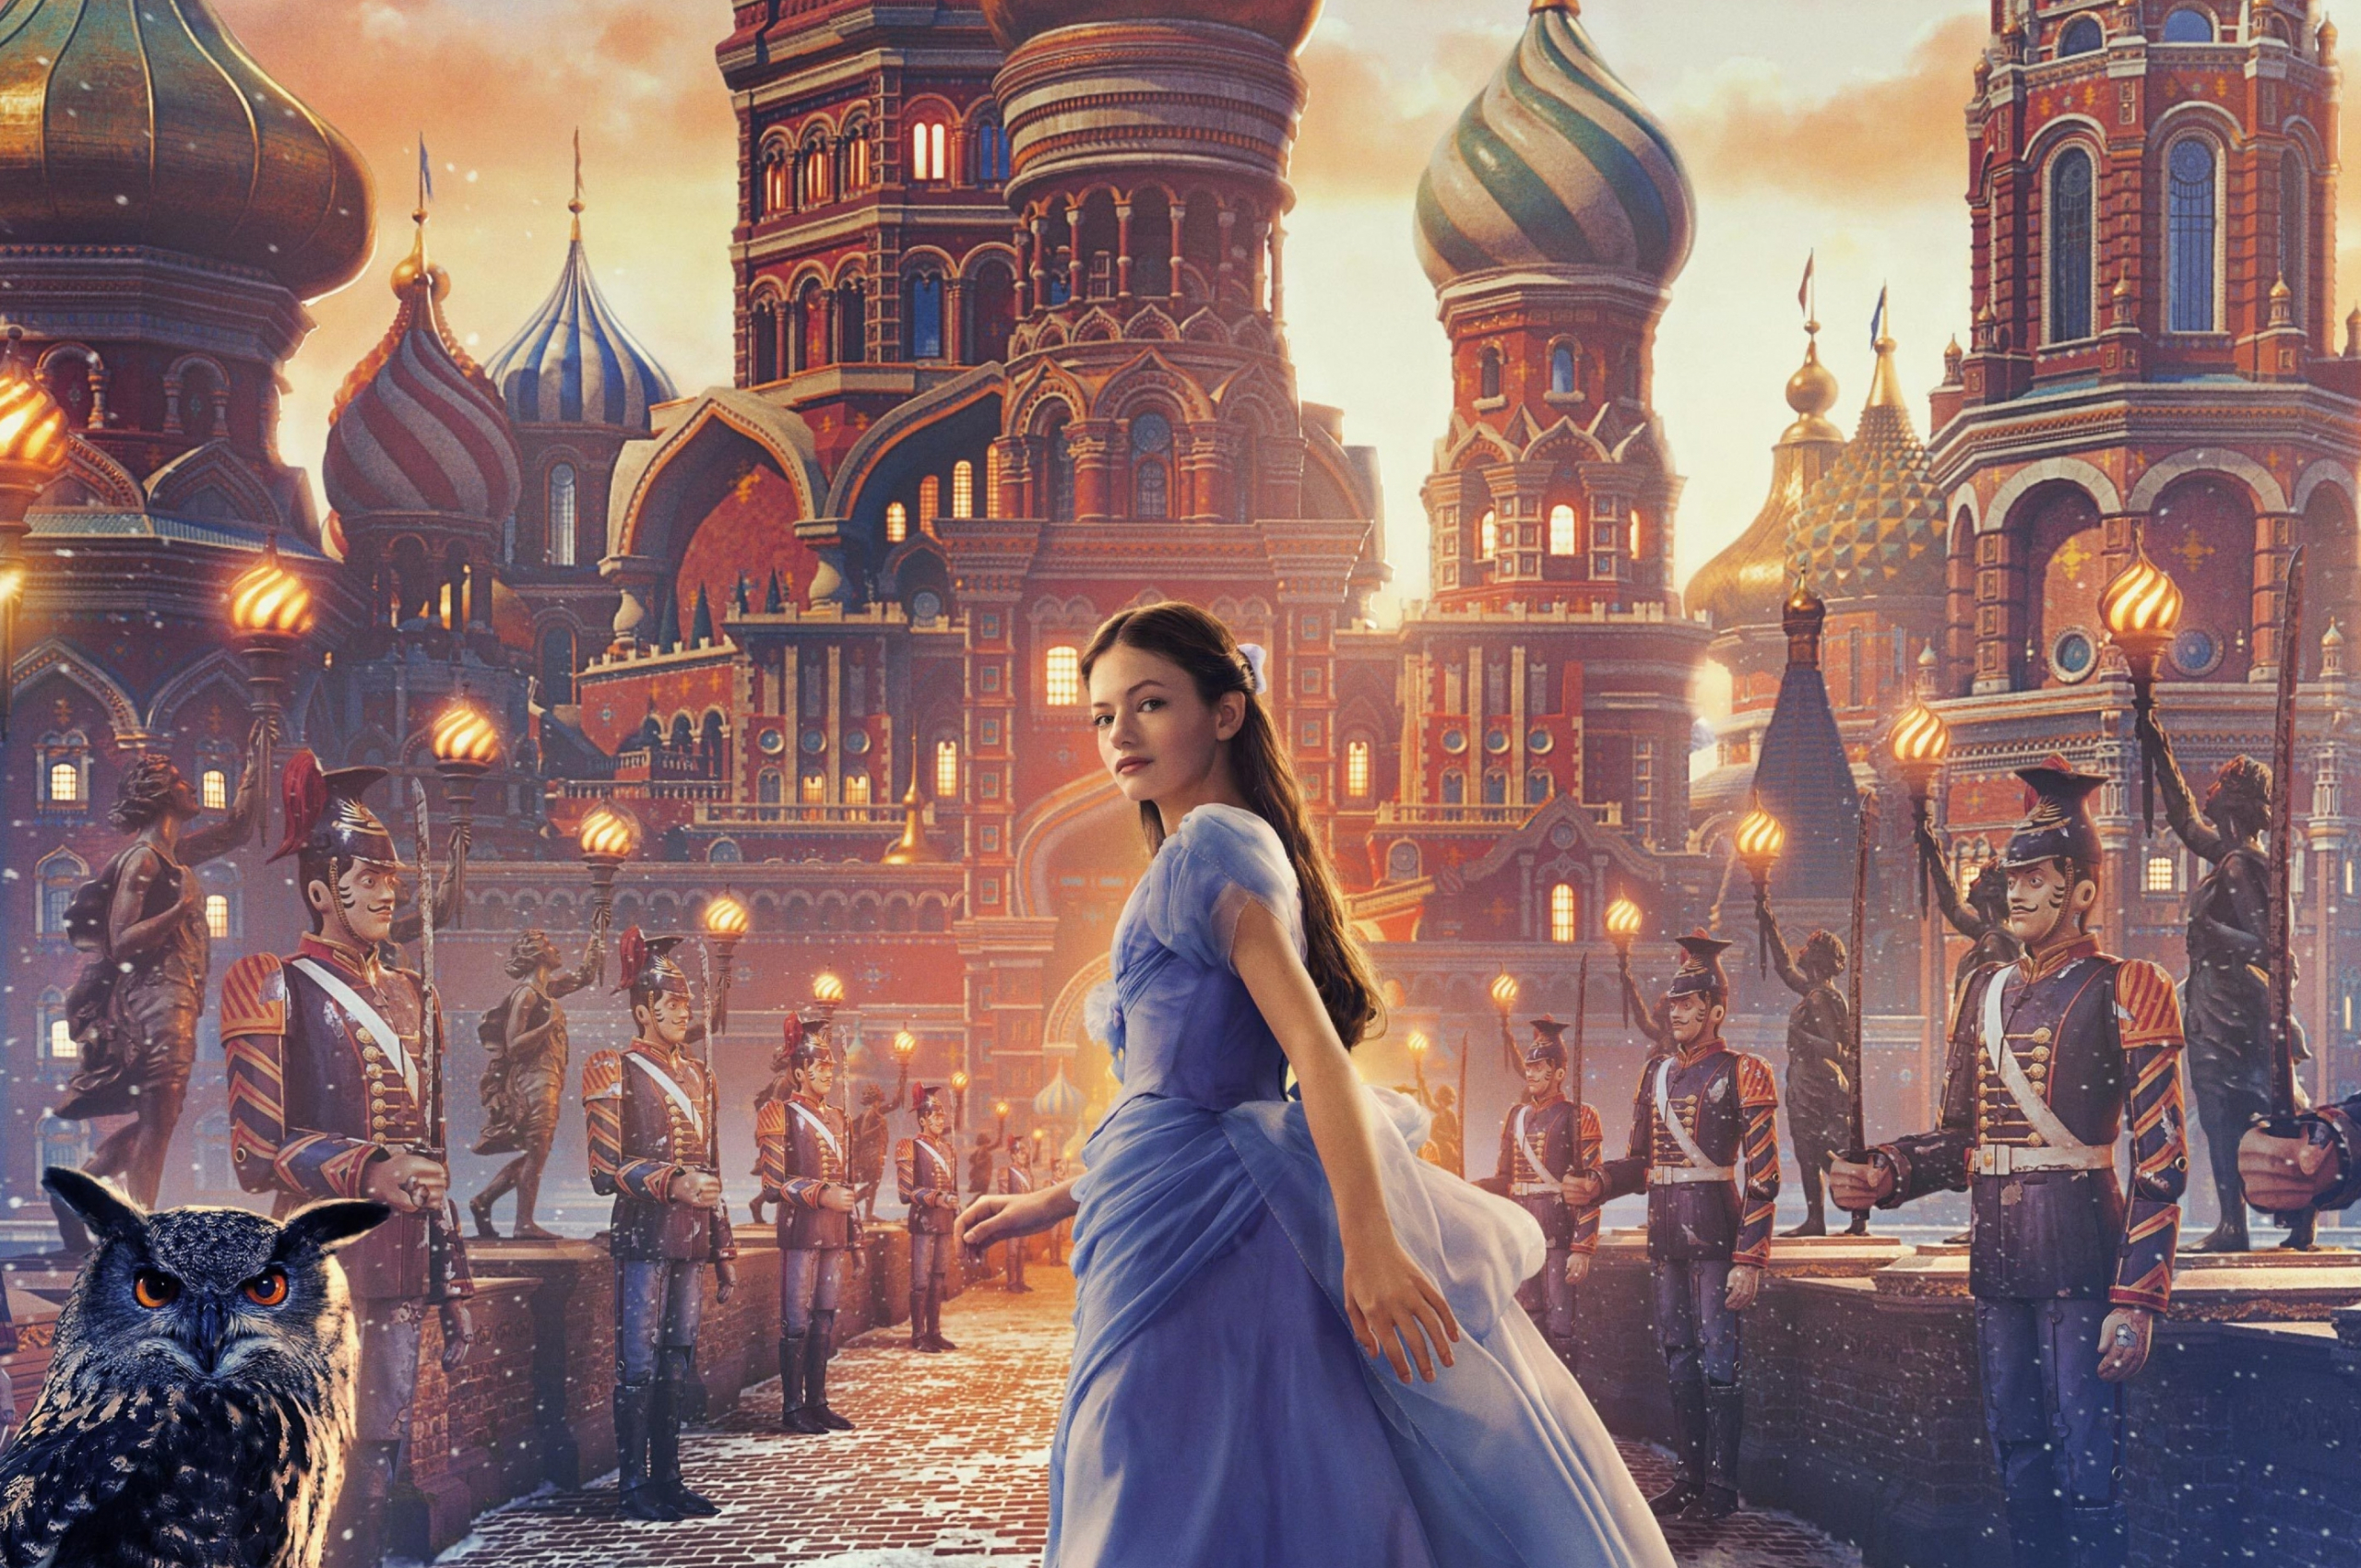 Mackenzie Foy The Nutcracker And The Four Realms 2018 Movie Wallpapers